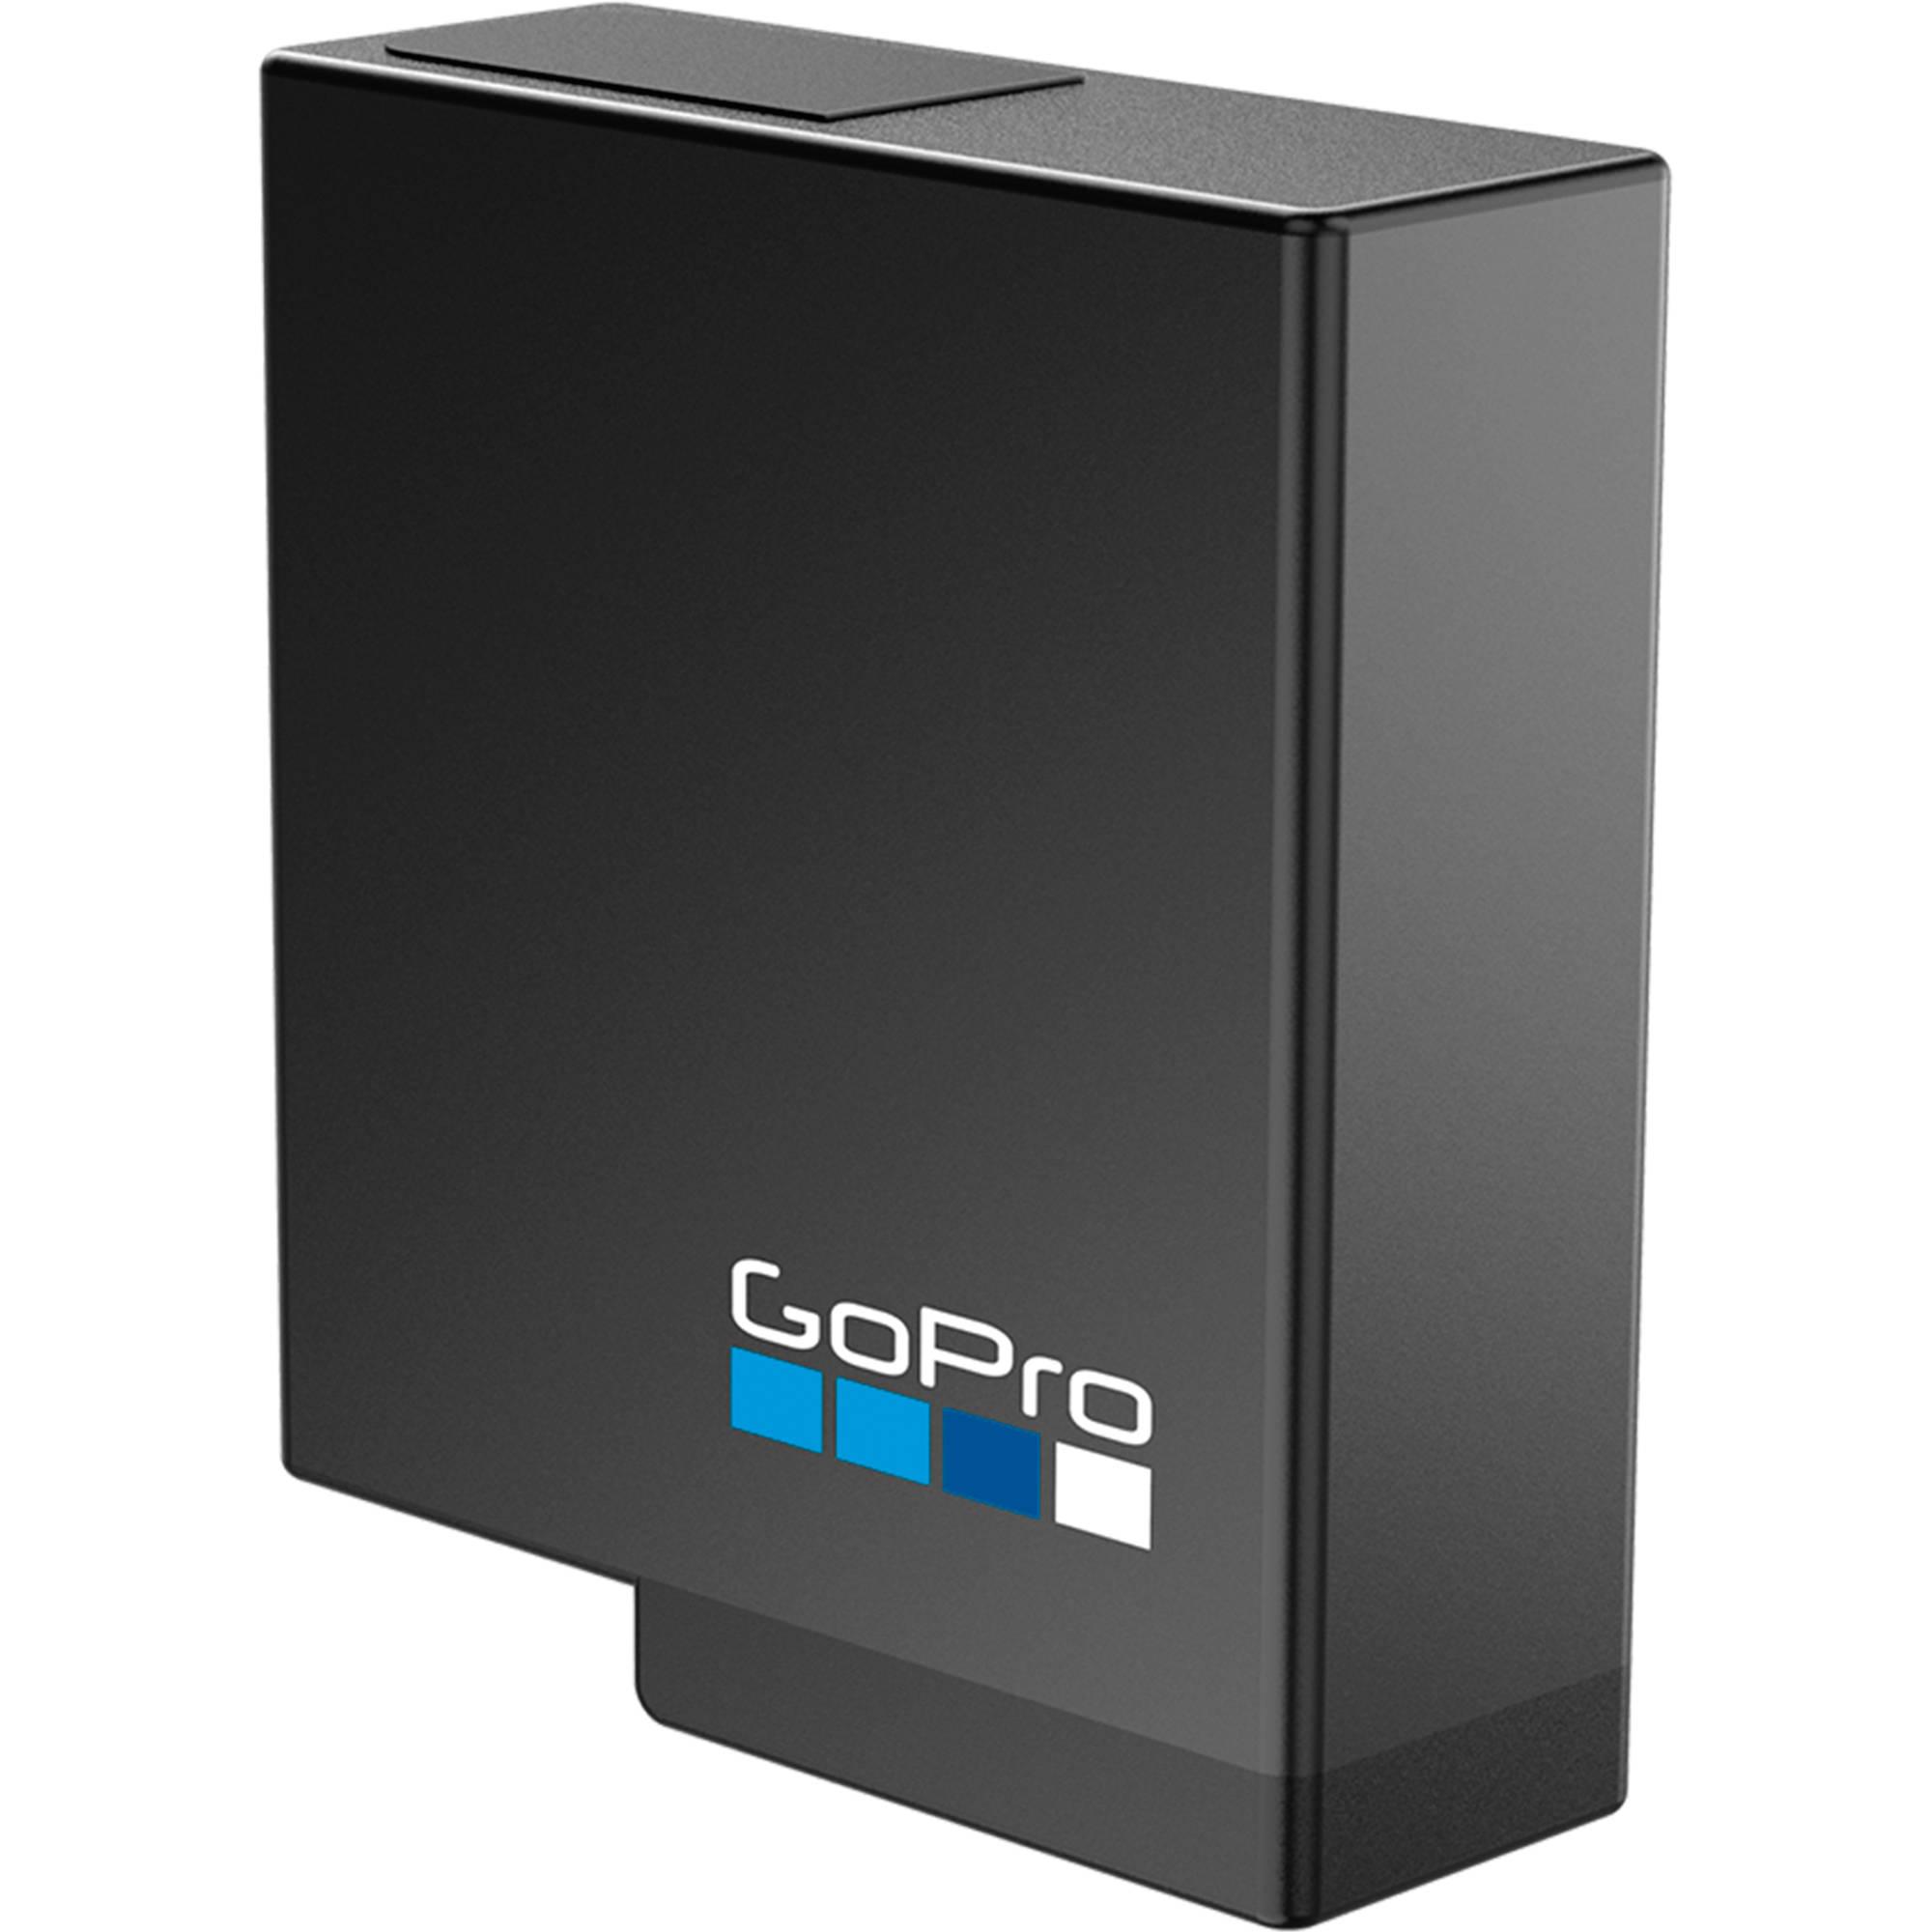 GoPro HERO7 Black Rechargeable 1220mAh Battery for $11.99